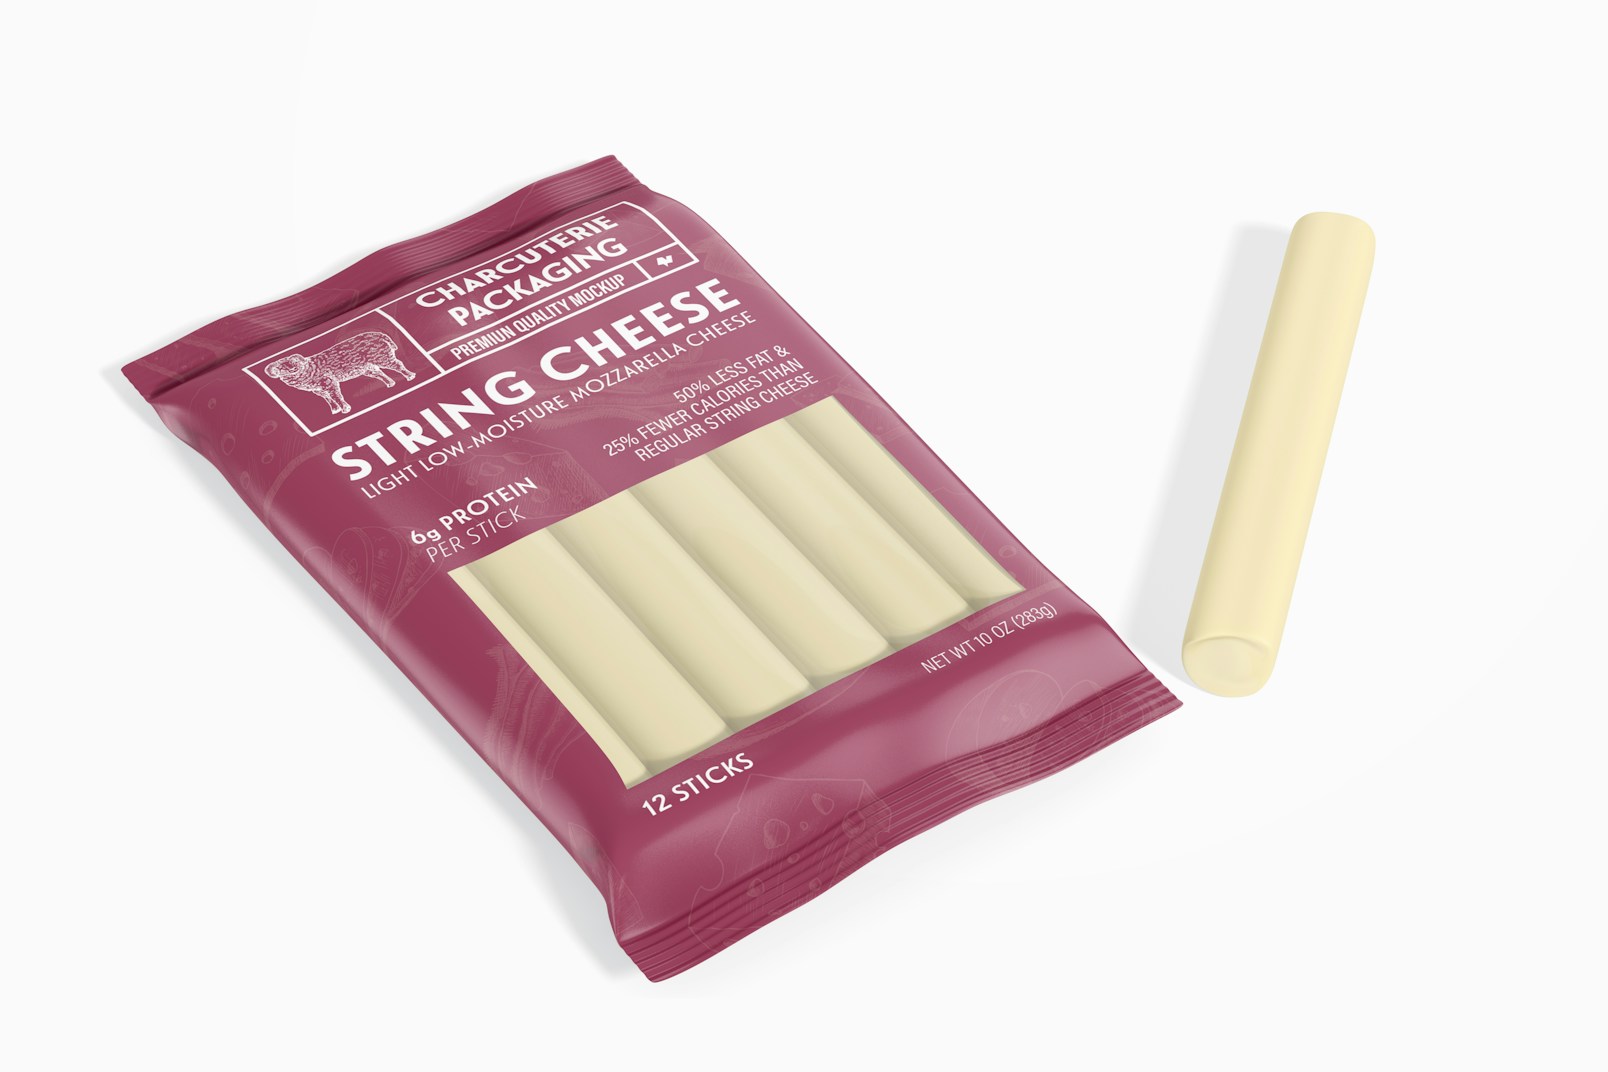 String Cheese Packaging Mockup, Perspective